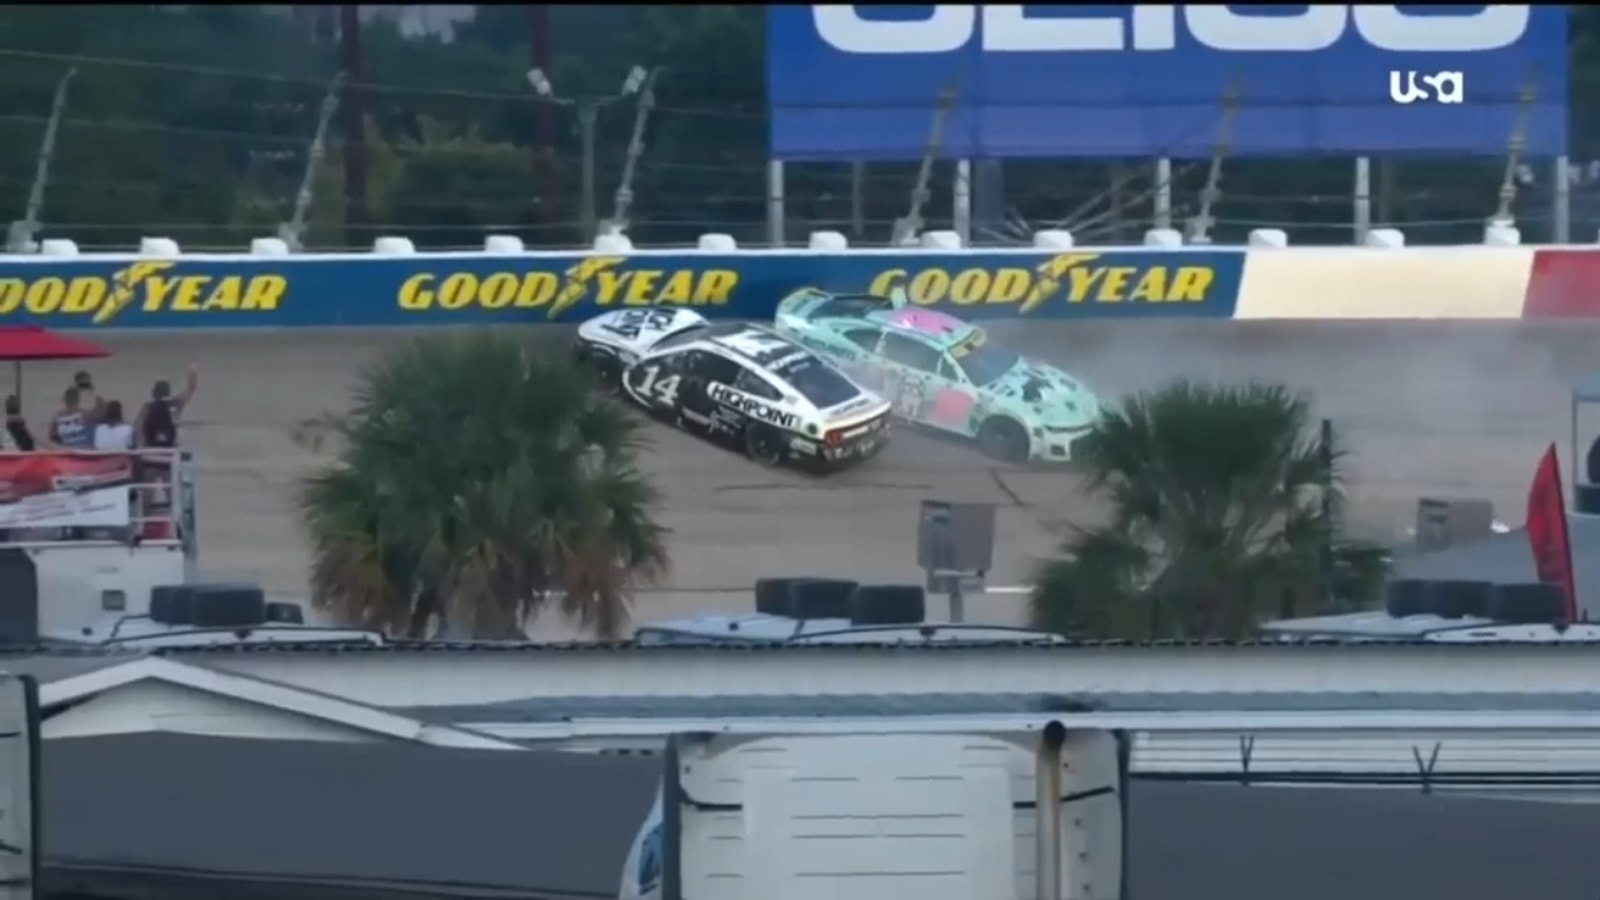 Chase Elliott's day ends early after collision with Turn 1 wall